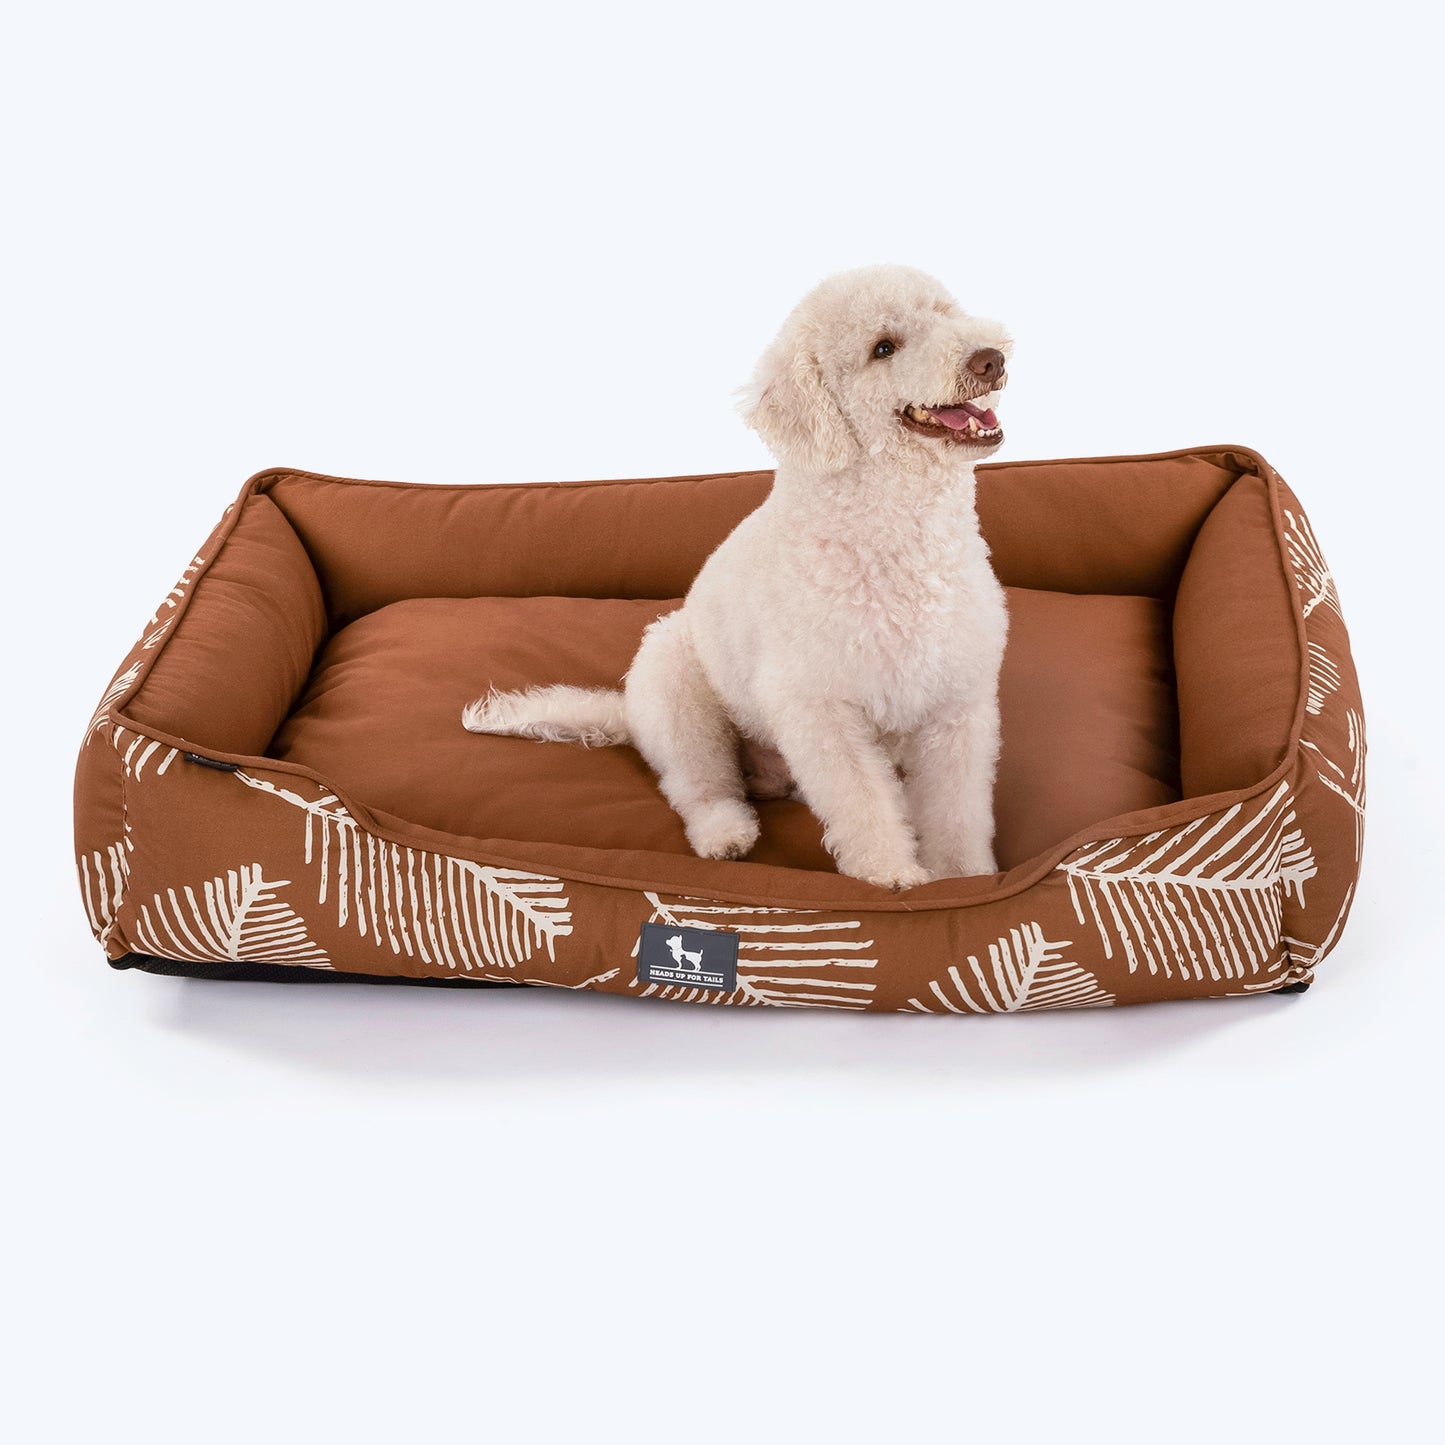 HUFT Tropical Palm Paradise Lounger Dog Bed - Brown -02